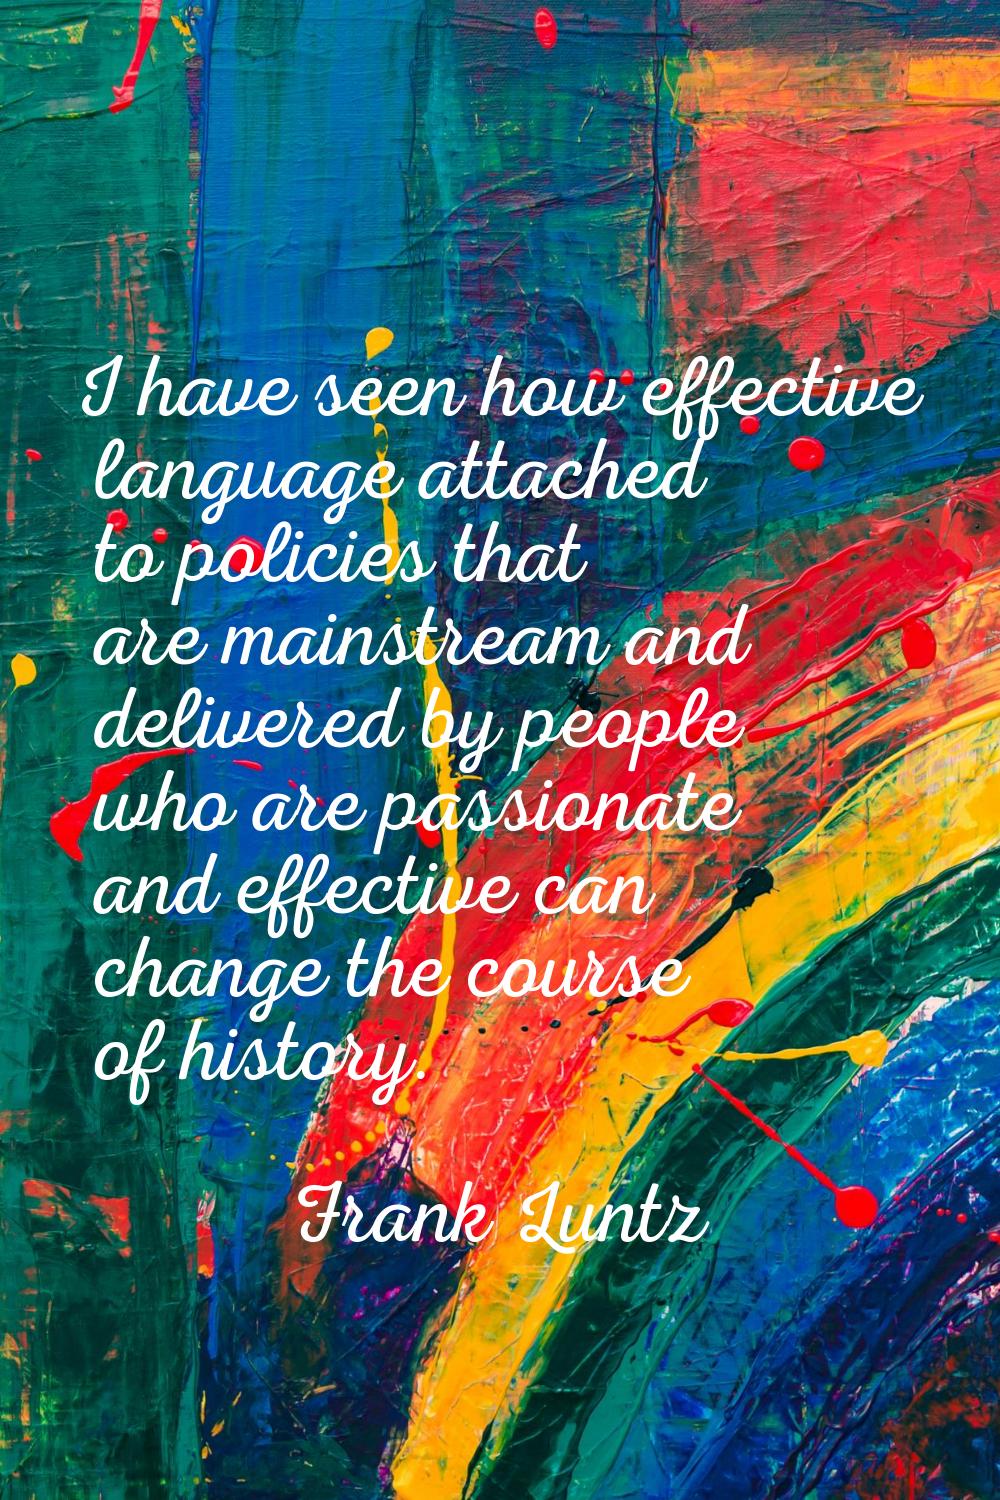 I have seen how effective language attached to policies that are mainstream and delivered by people